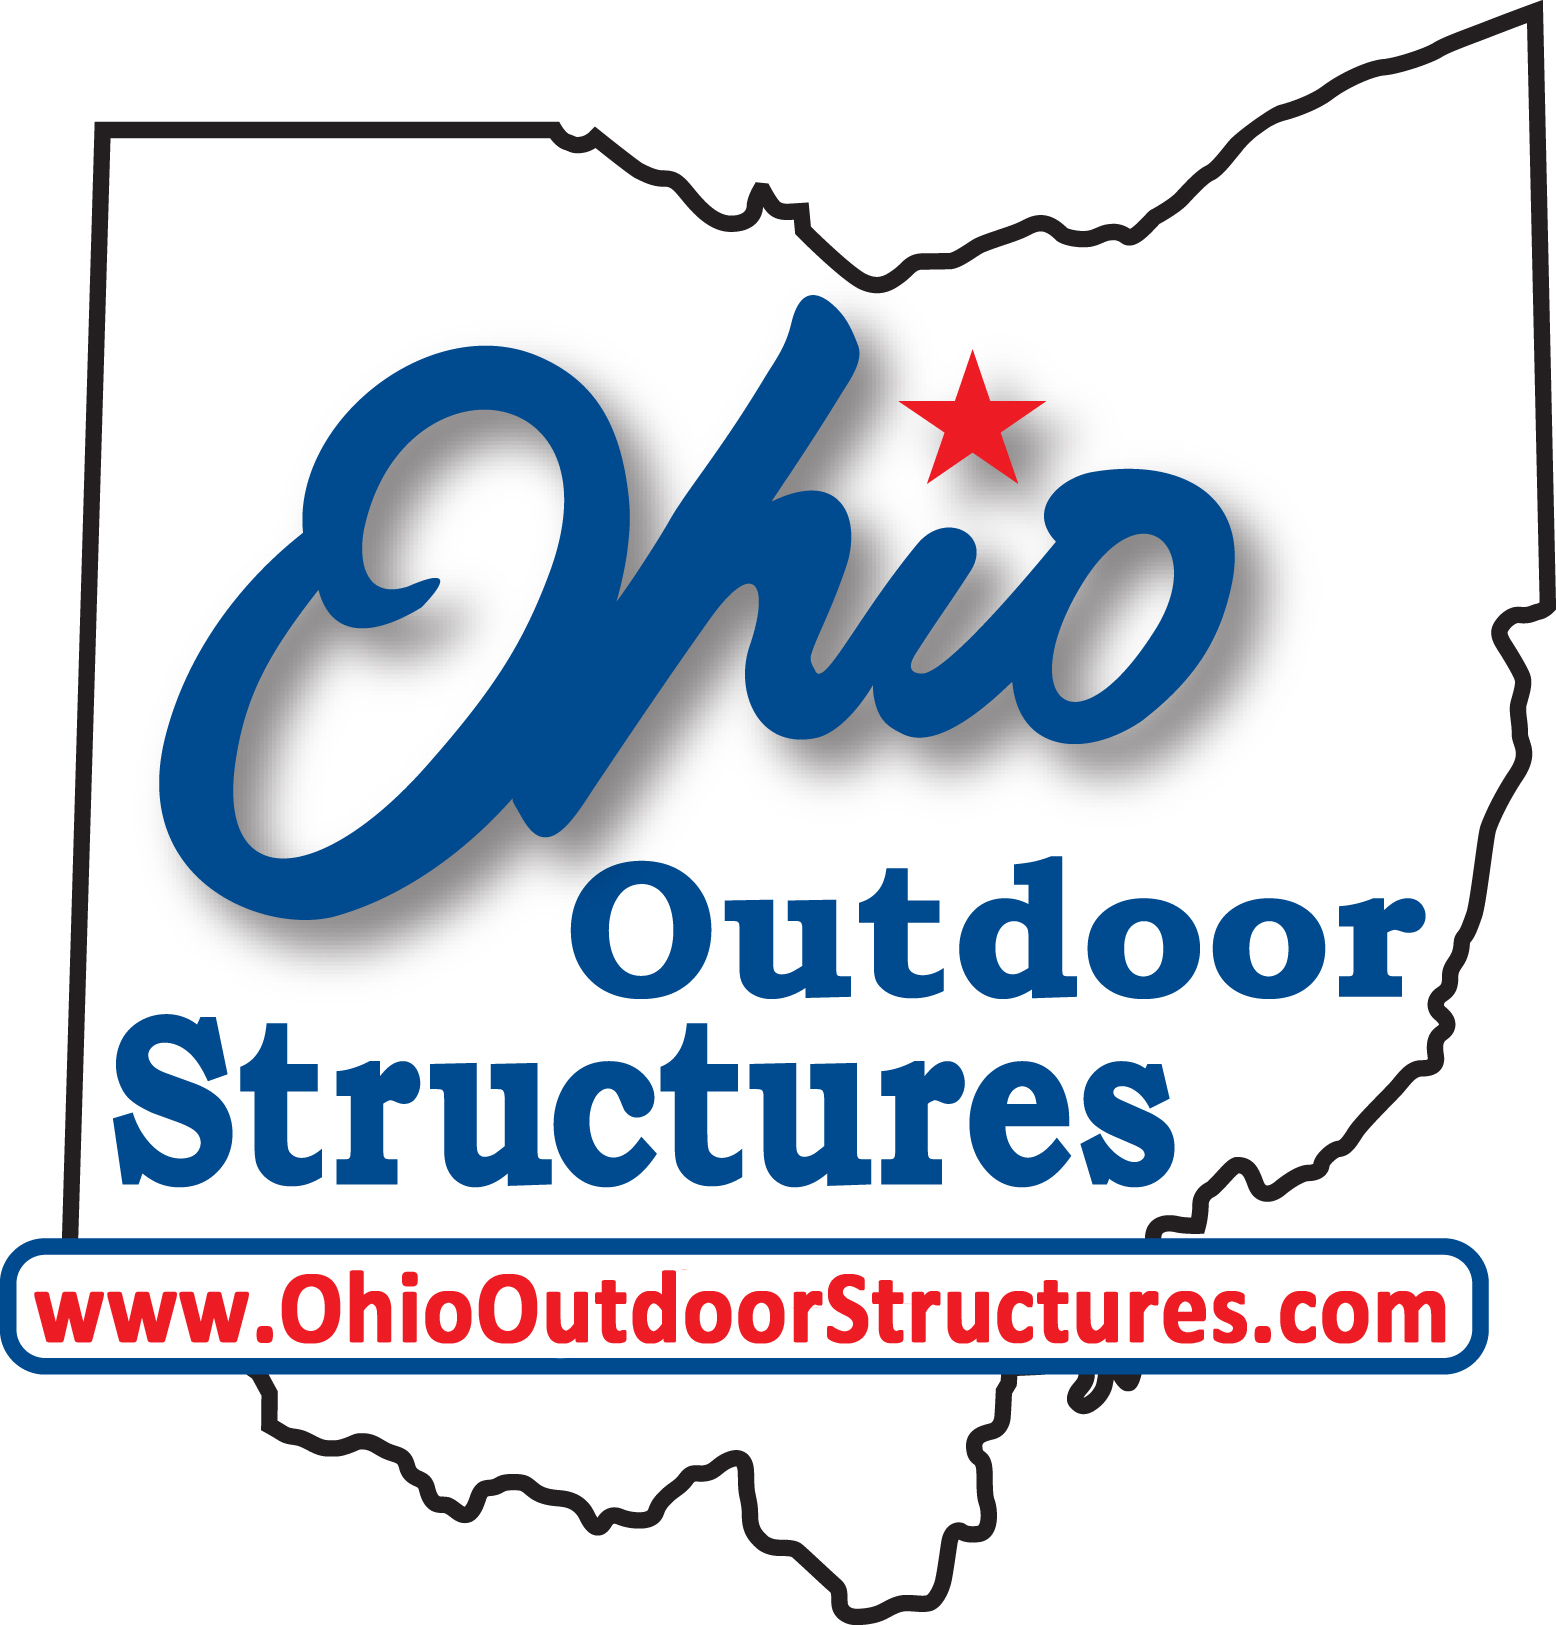 Ohio Outdoor Structures - West Chester